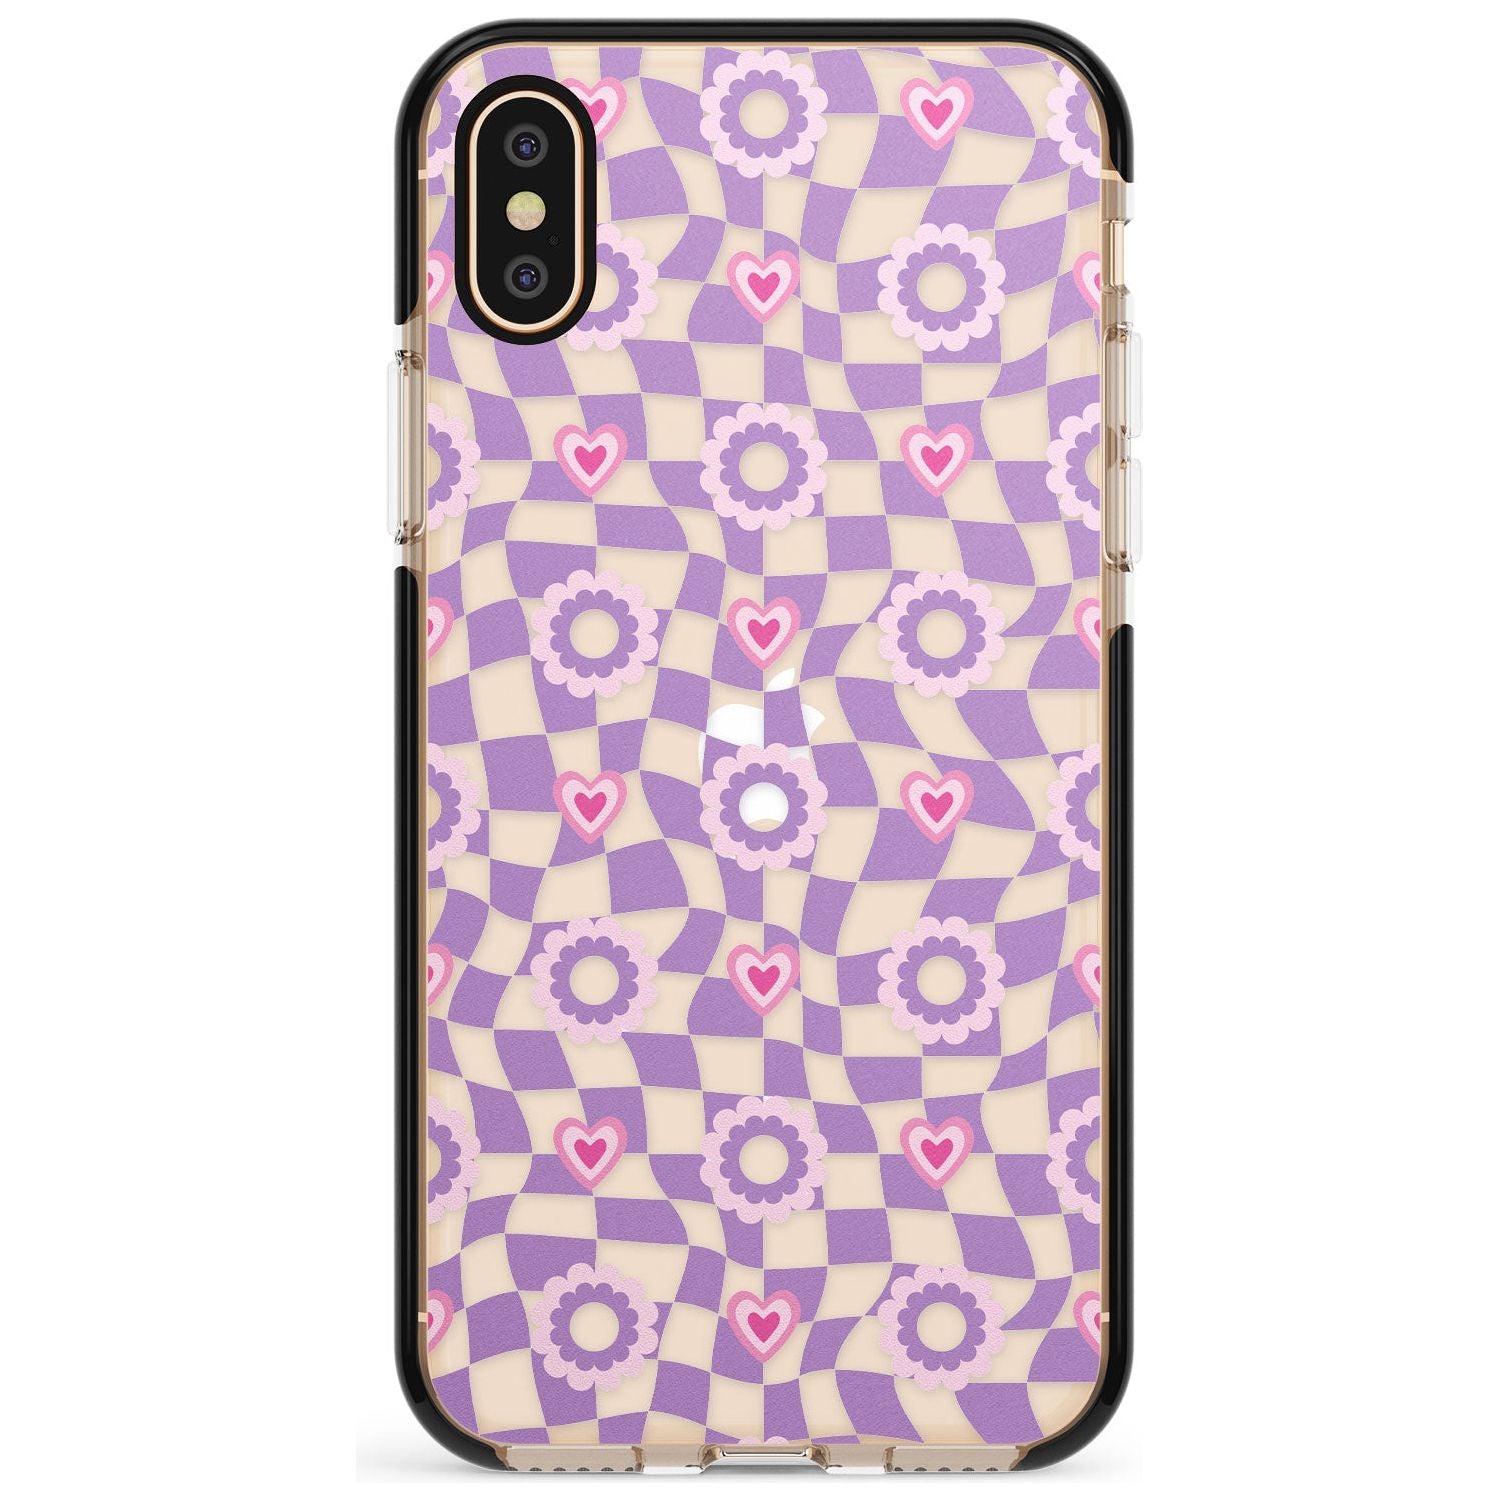 Checkered Love Pattern Black Impact Phone Case for iPhone X XS Max XR